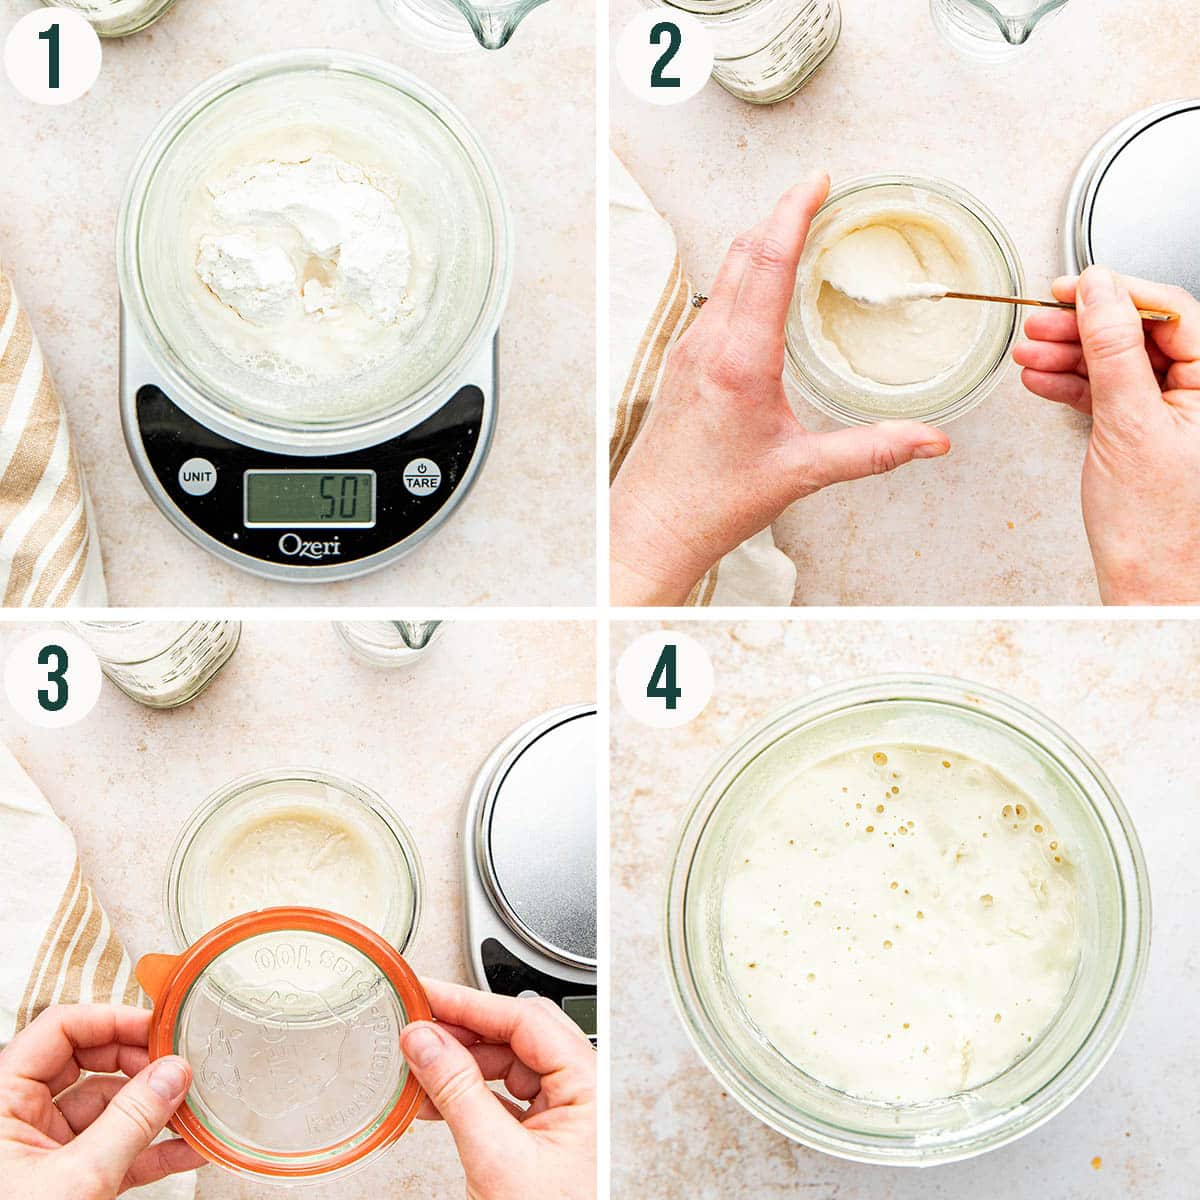 How to make sourdough starter steps 1 to 4, feeding and growing the starter.